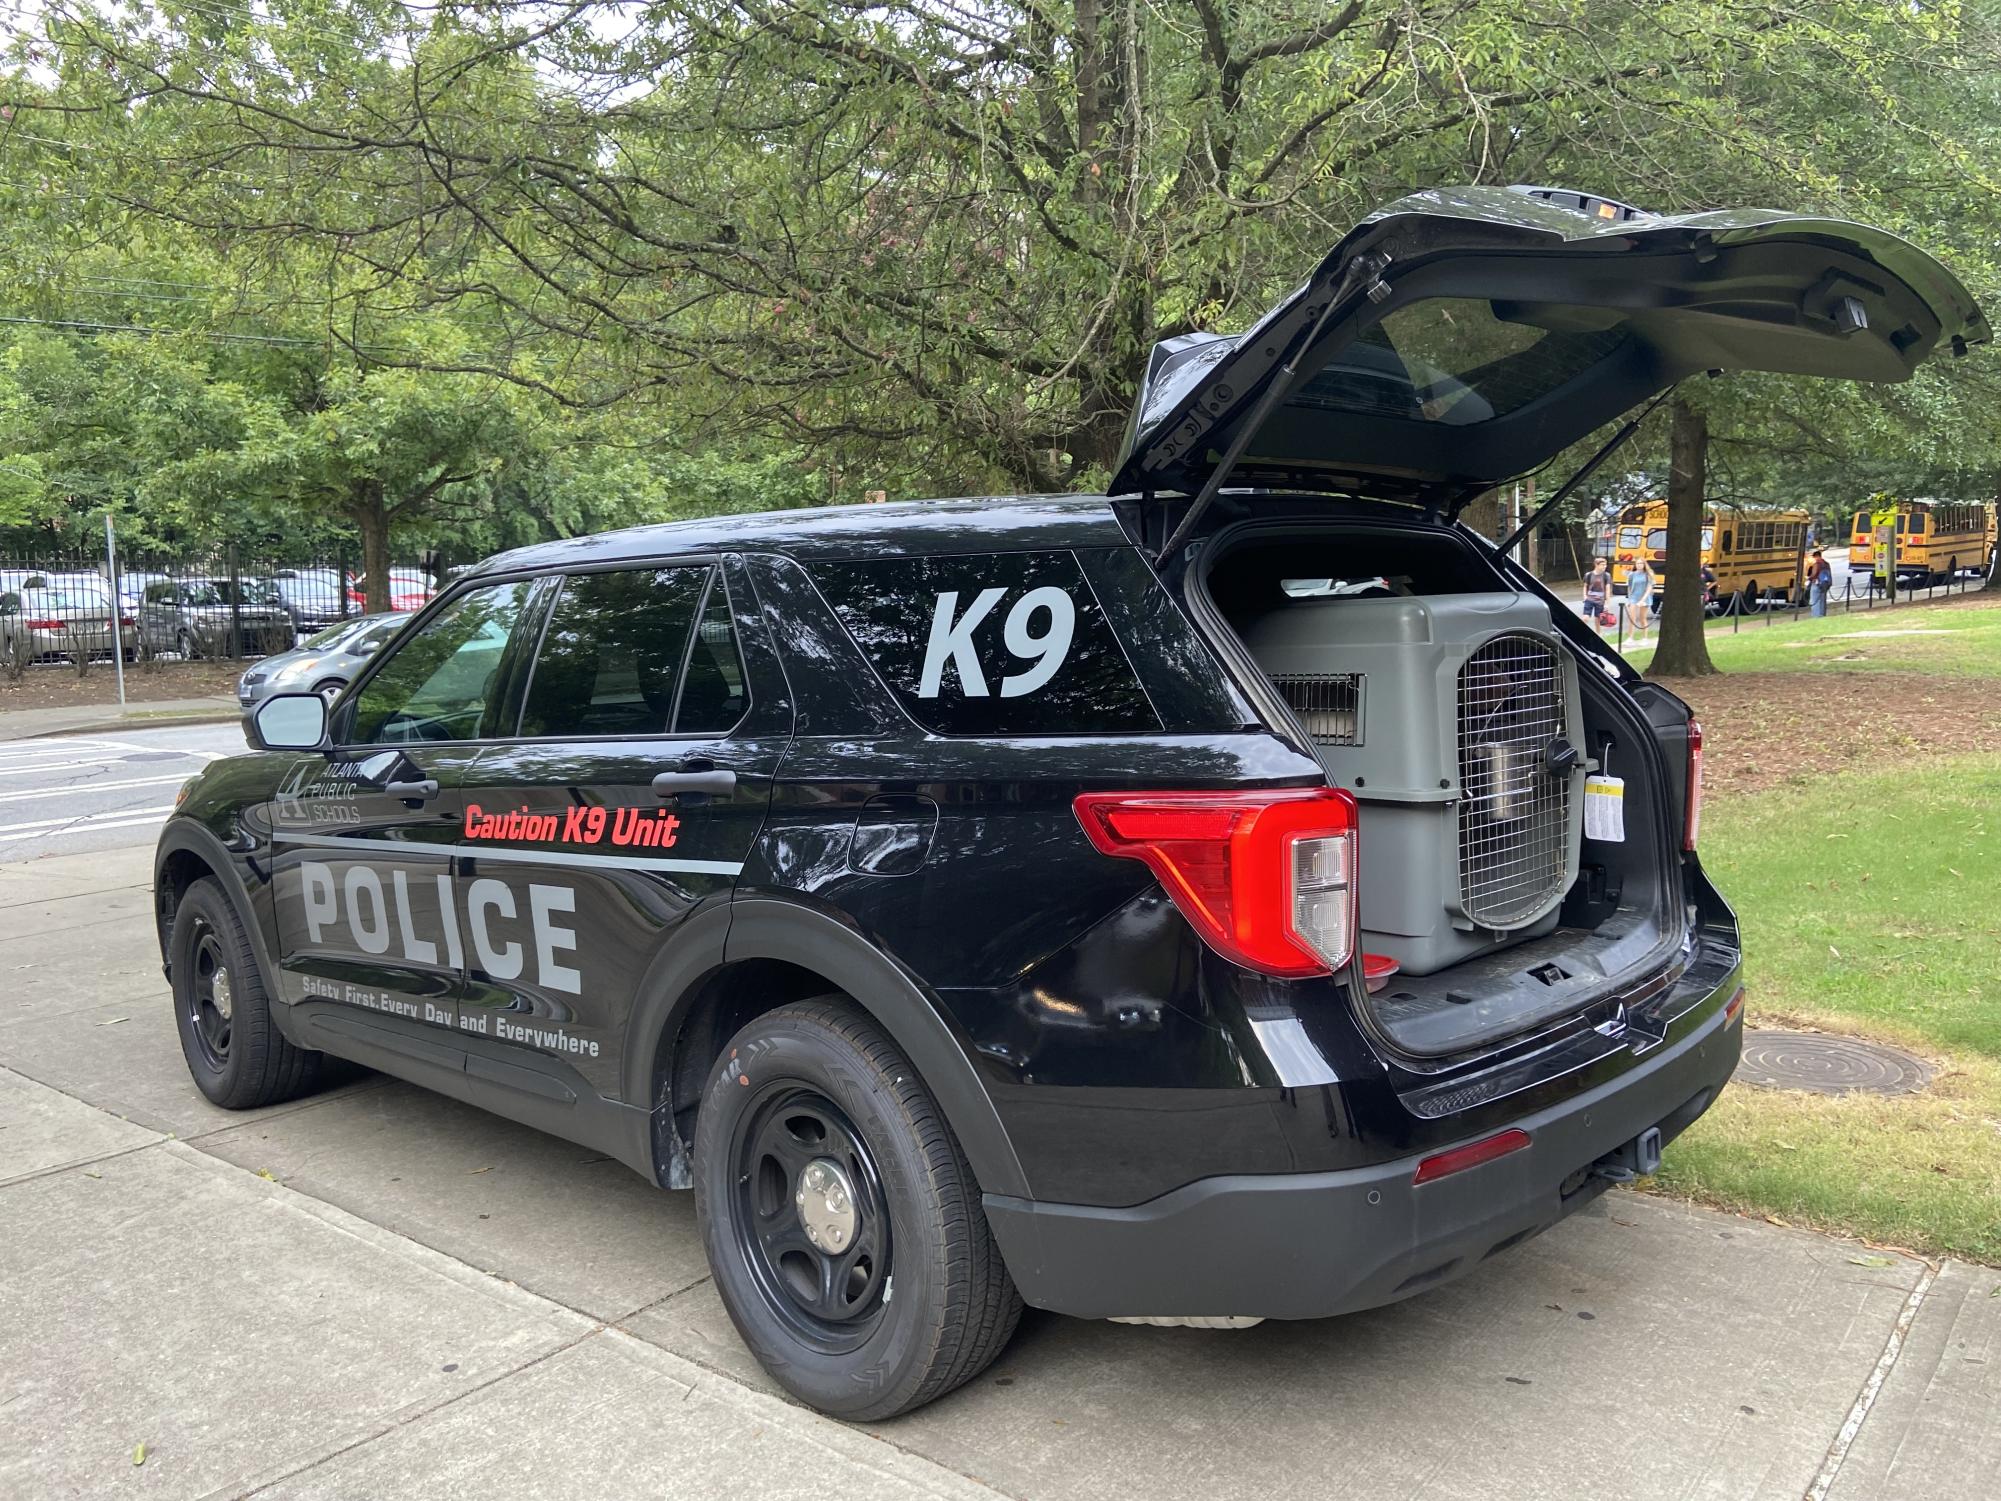 An APSPD K-9 unit parks outside of Midtown during student arrival the day after the bomb threat call. As a precautionary measure, Dr. Bockman ordered K-9 units to remain on campus during arrival and throughout the day following the call.